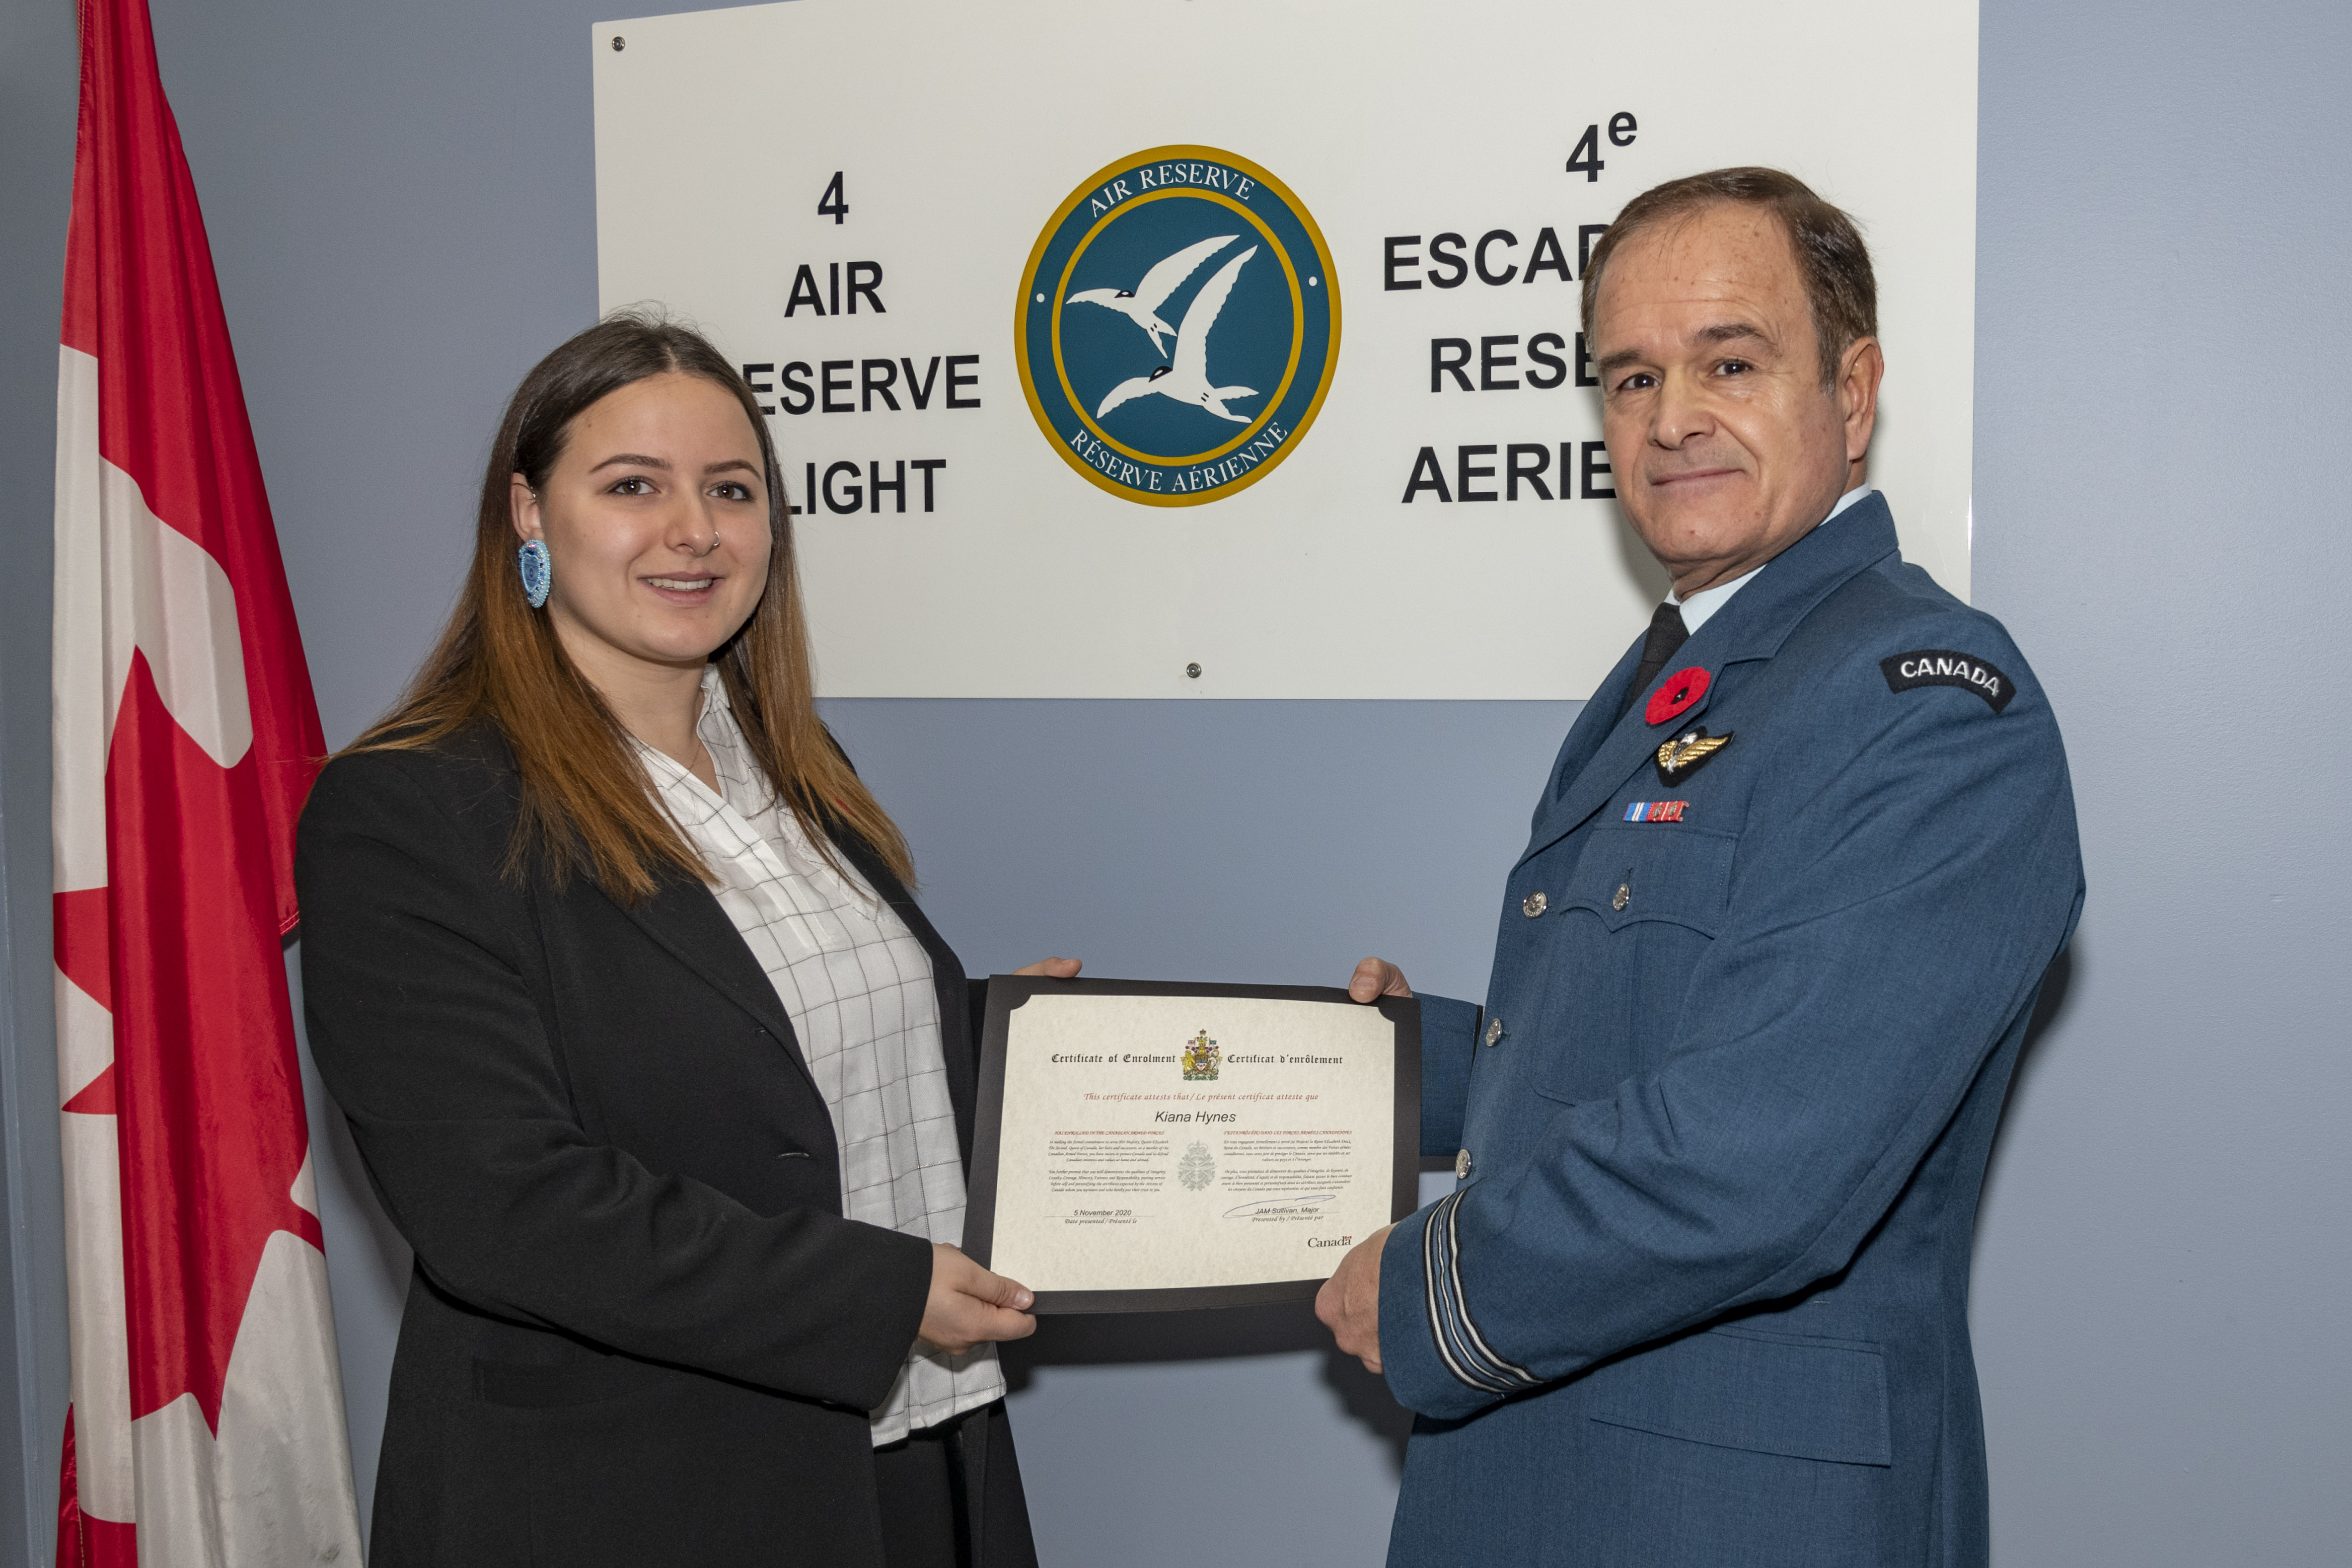 Aviator Kiana Hynes was enrolled in the RCAF Reserve at 4 Wing with Major John Sullivan, 4 Wing Air Reserve Flight Commander (at right).